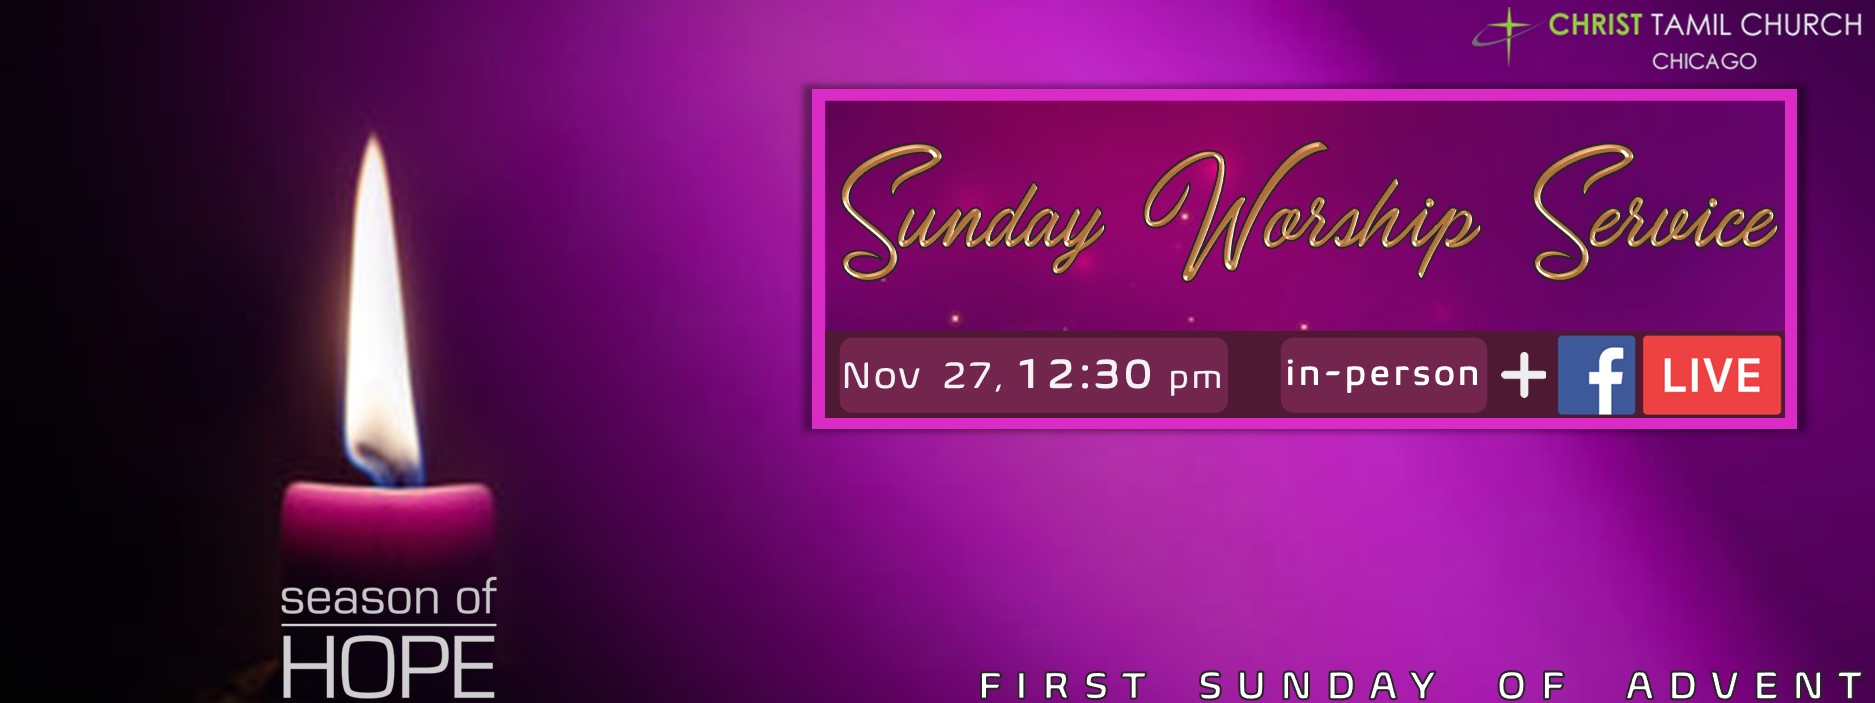 First sunday of advent